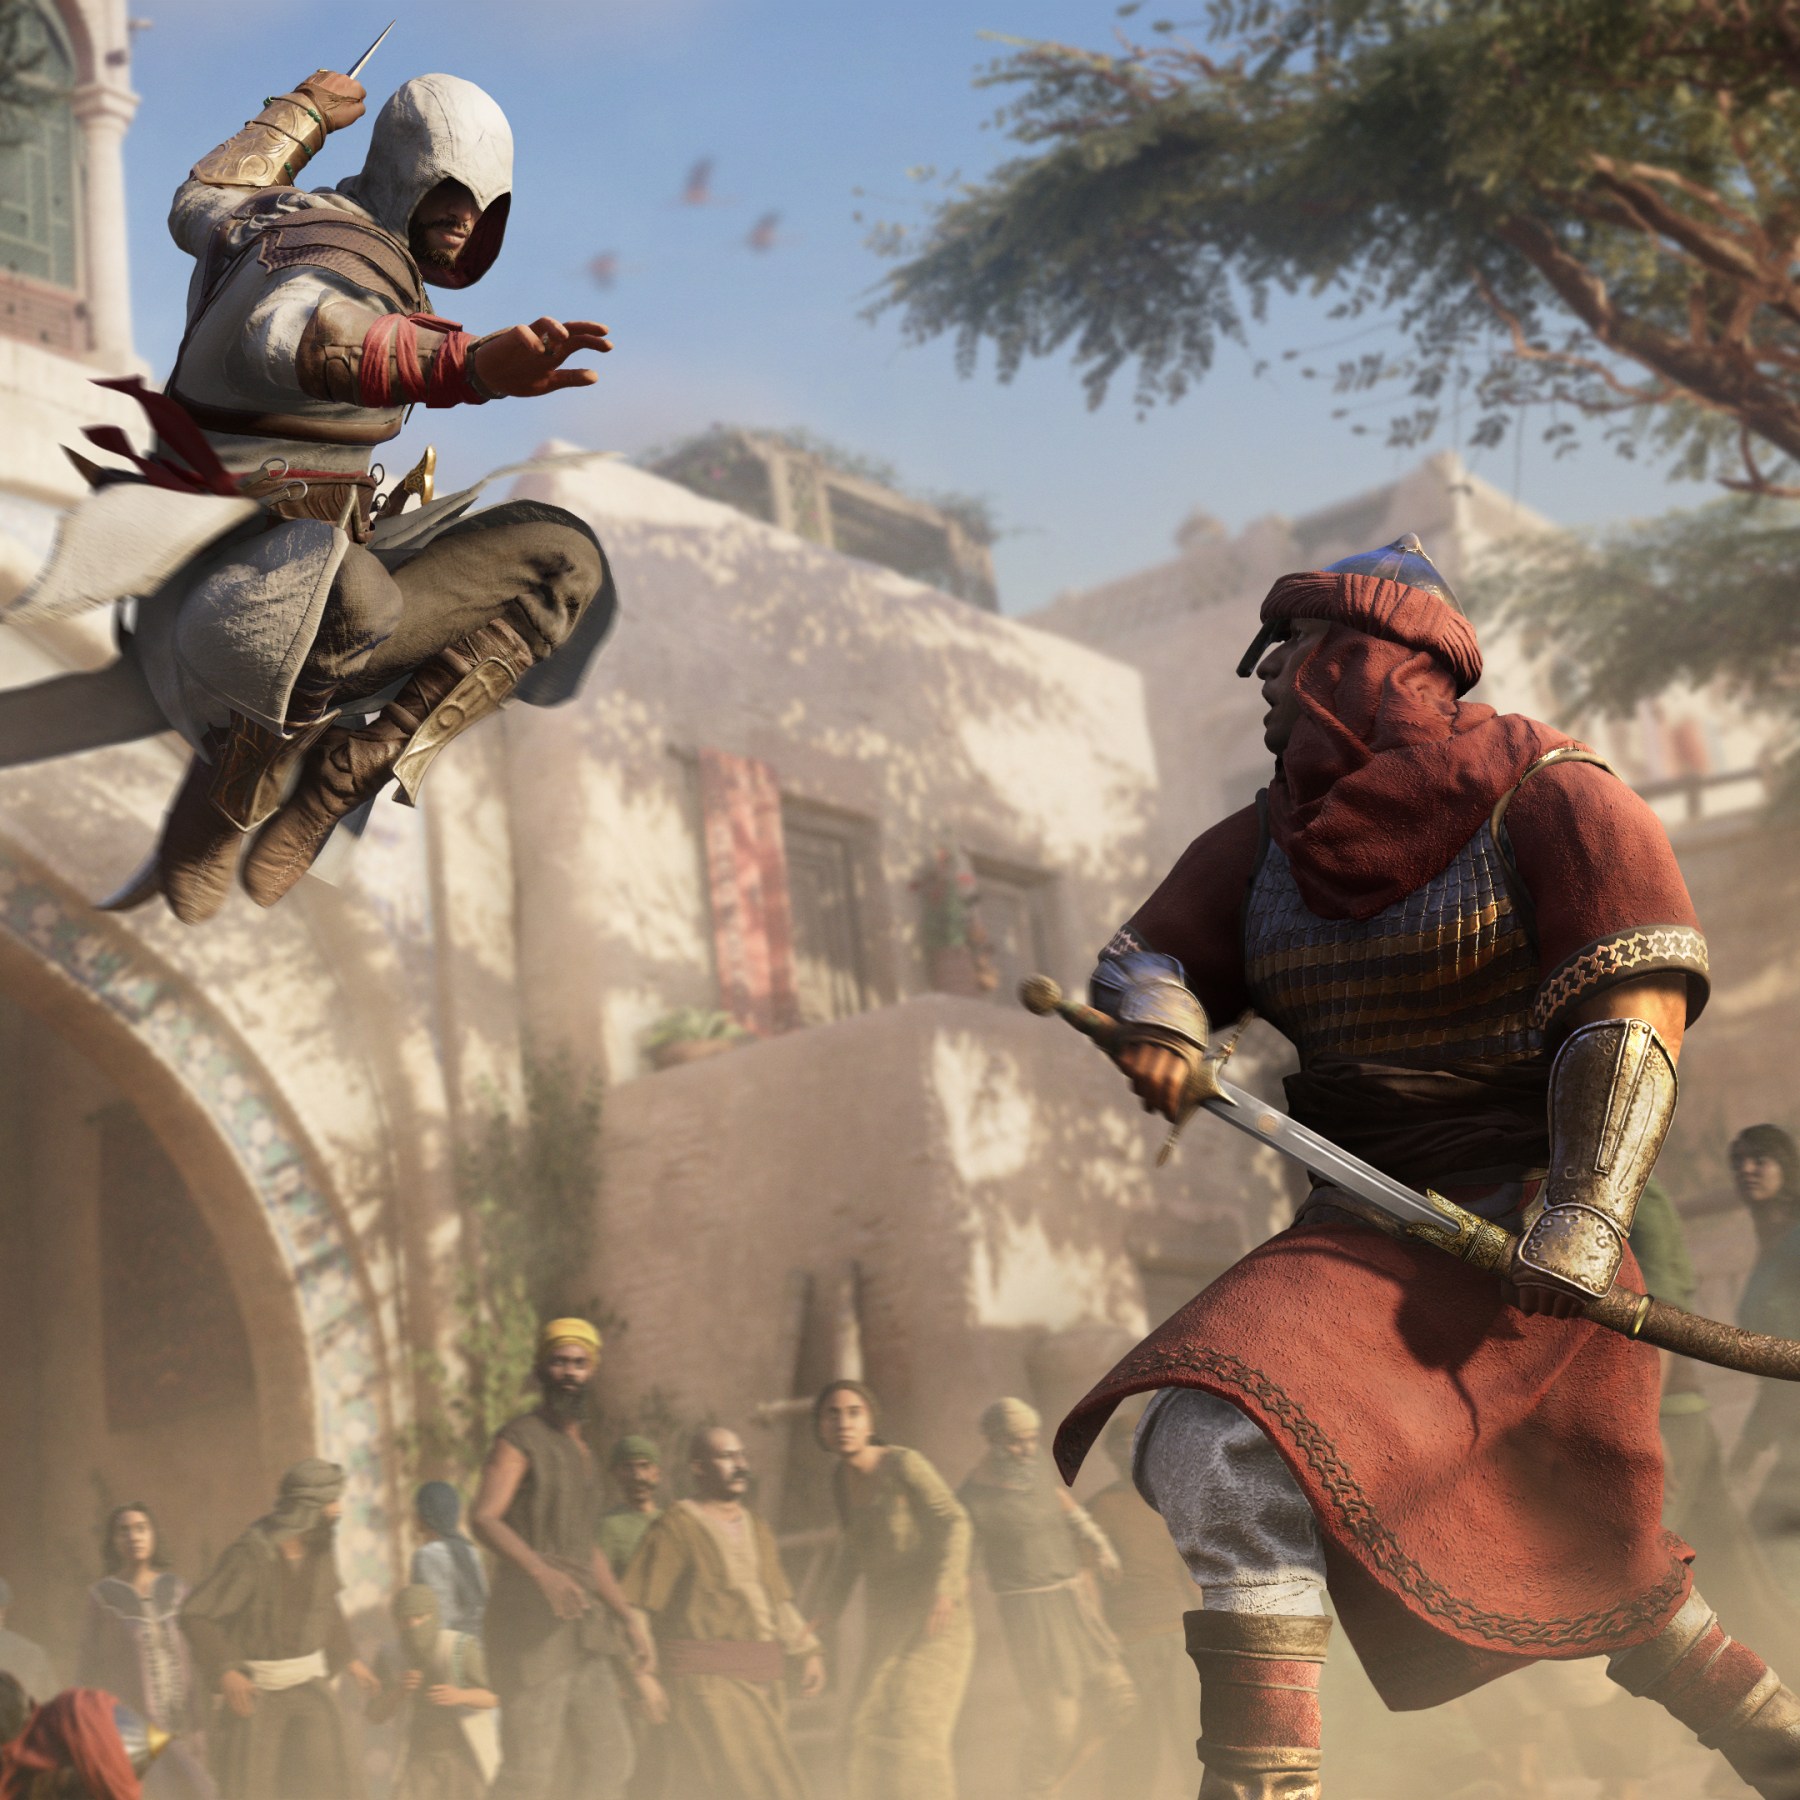 New Assassin's Creed video game brings Baghdad's Golden Age back to life, Entertainment News